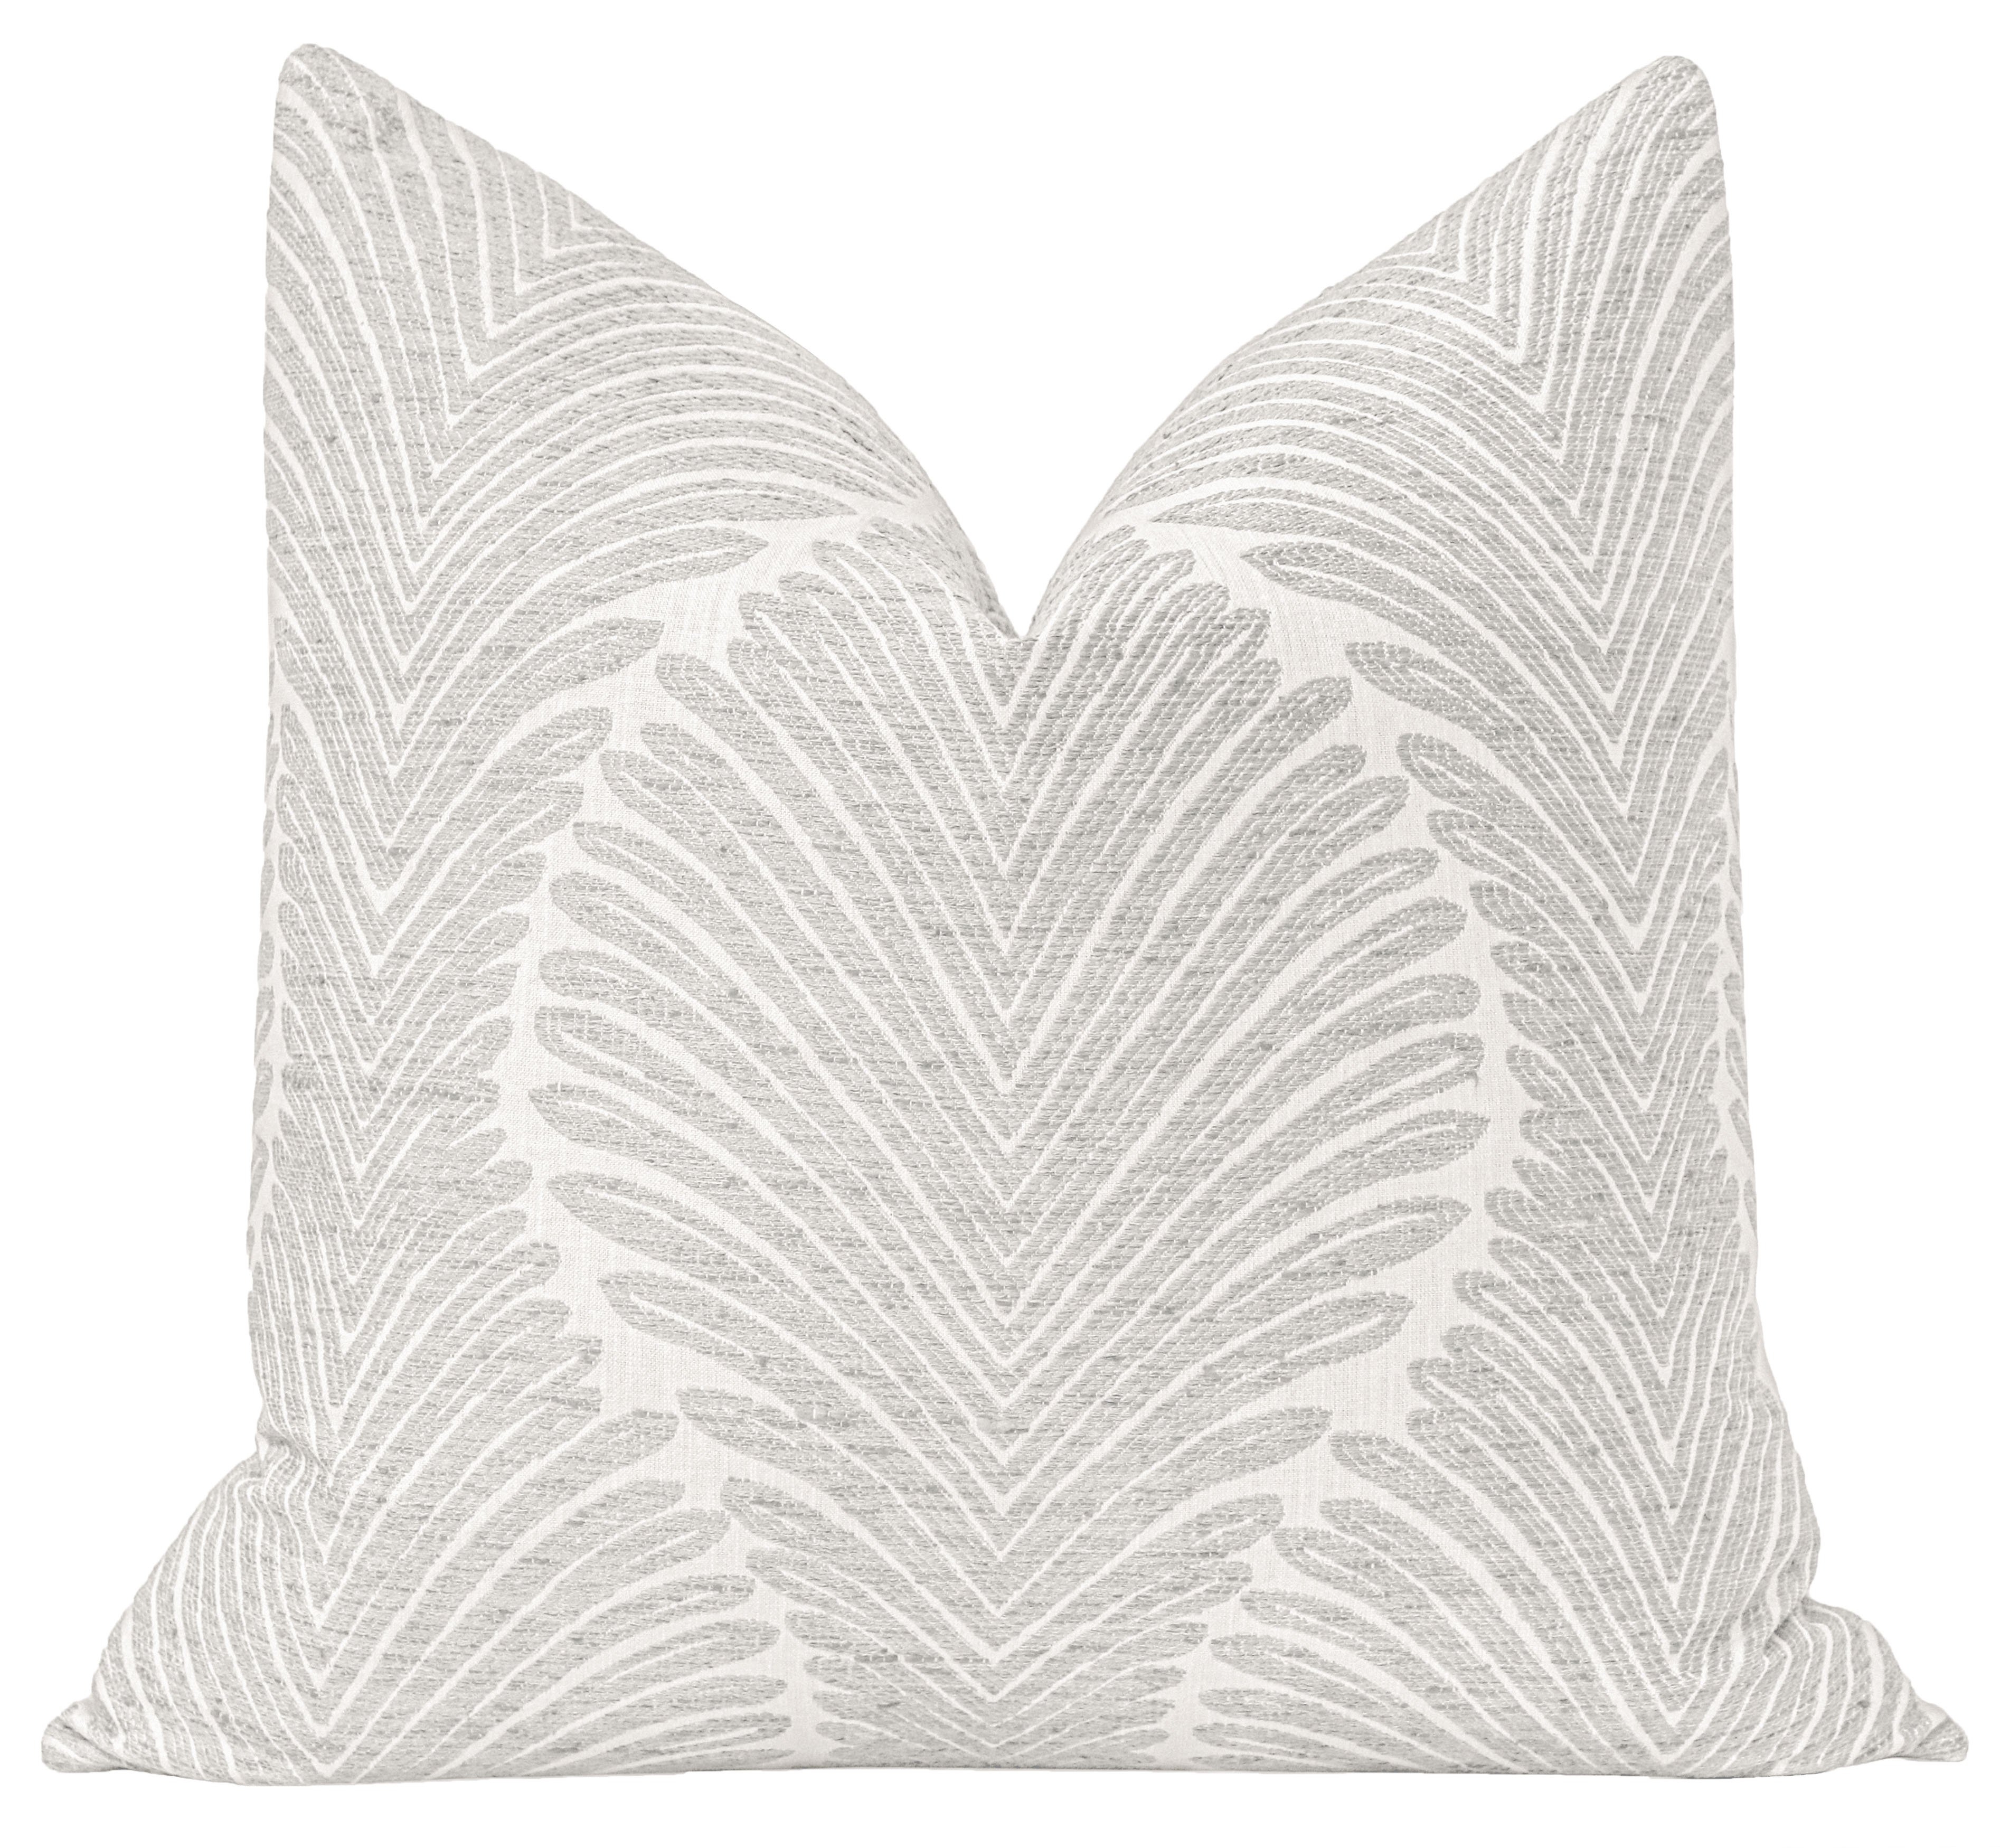 Musgrove Chenille Pillow Cover, Dove Grey, 18" x 18" - Image 0